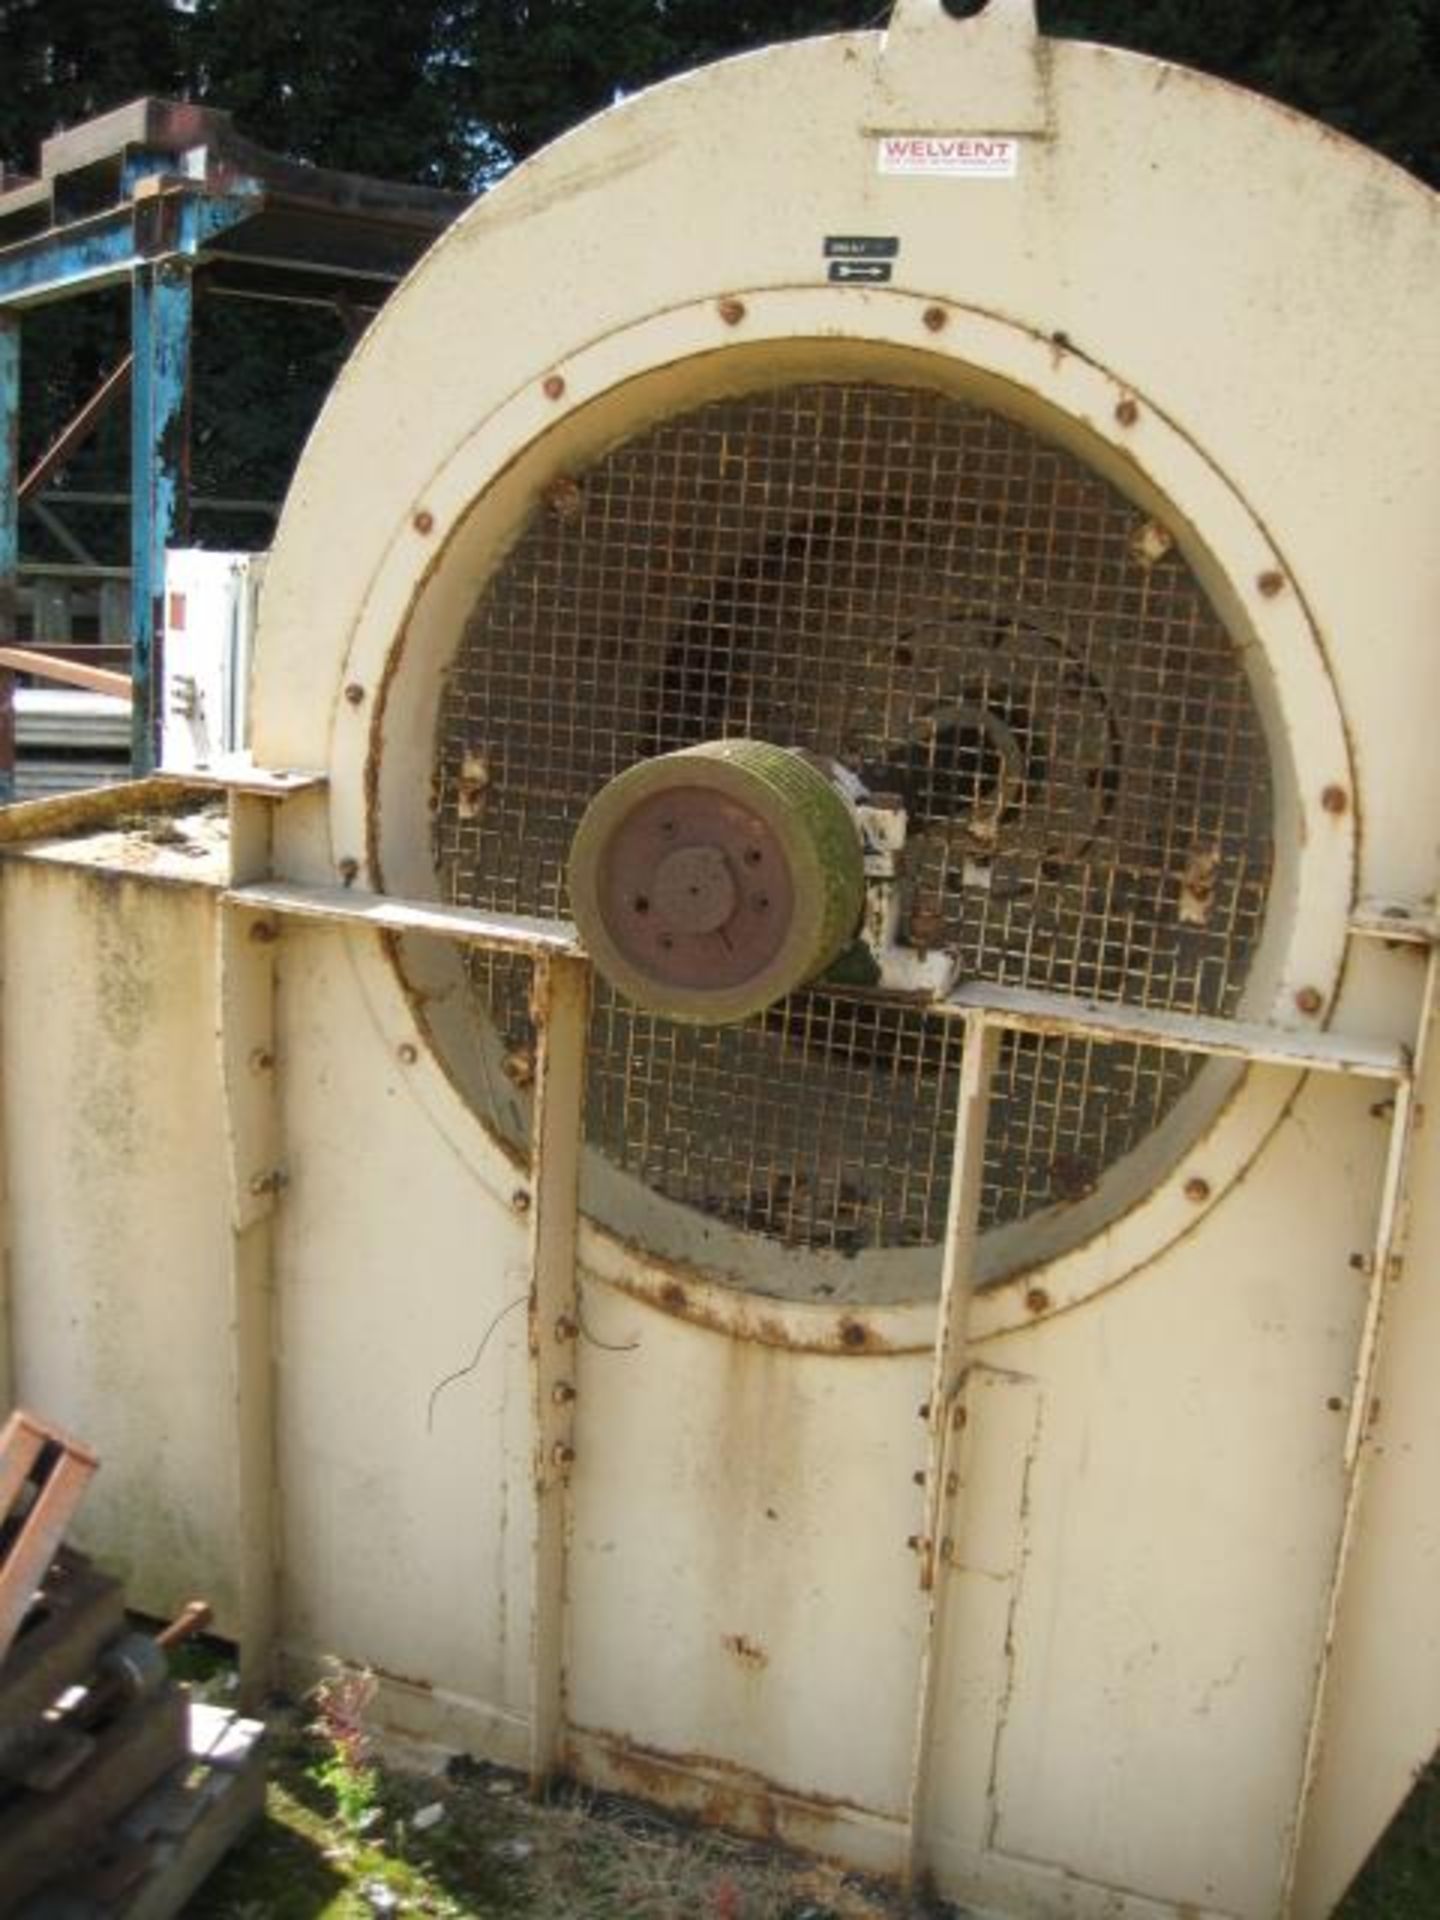 Welvent Centrifugal Fan, with backward lamina blades and air inlets on both sides, belt driven but - Bild 2 aus 4